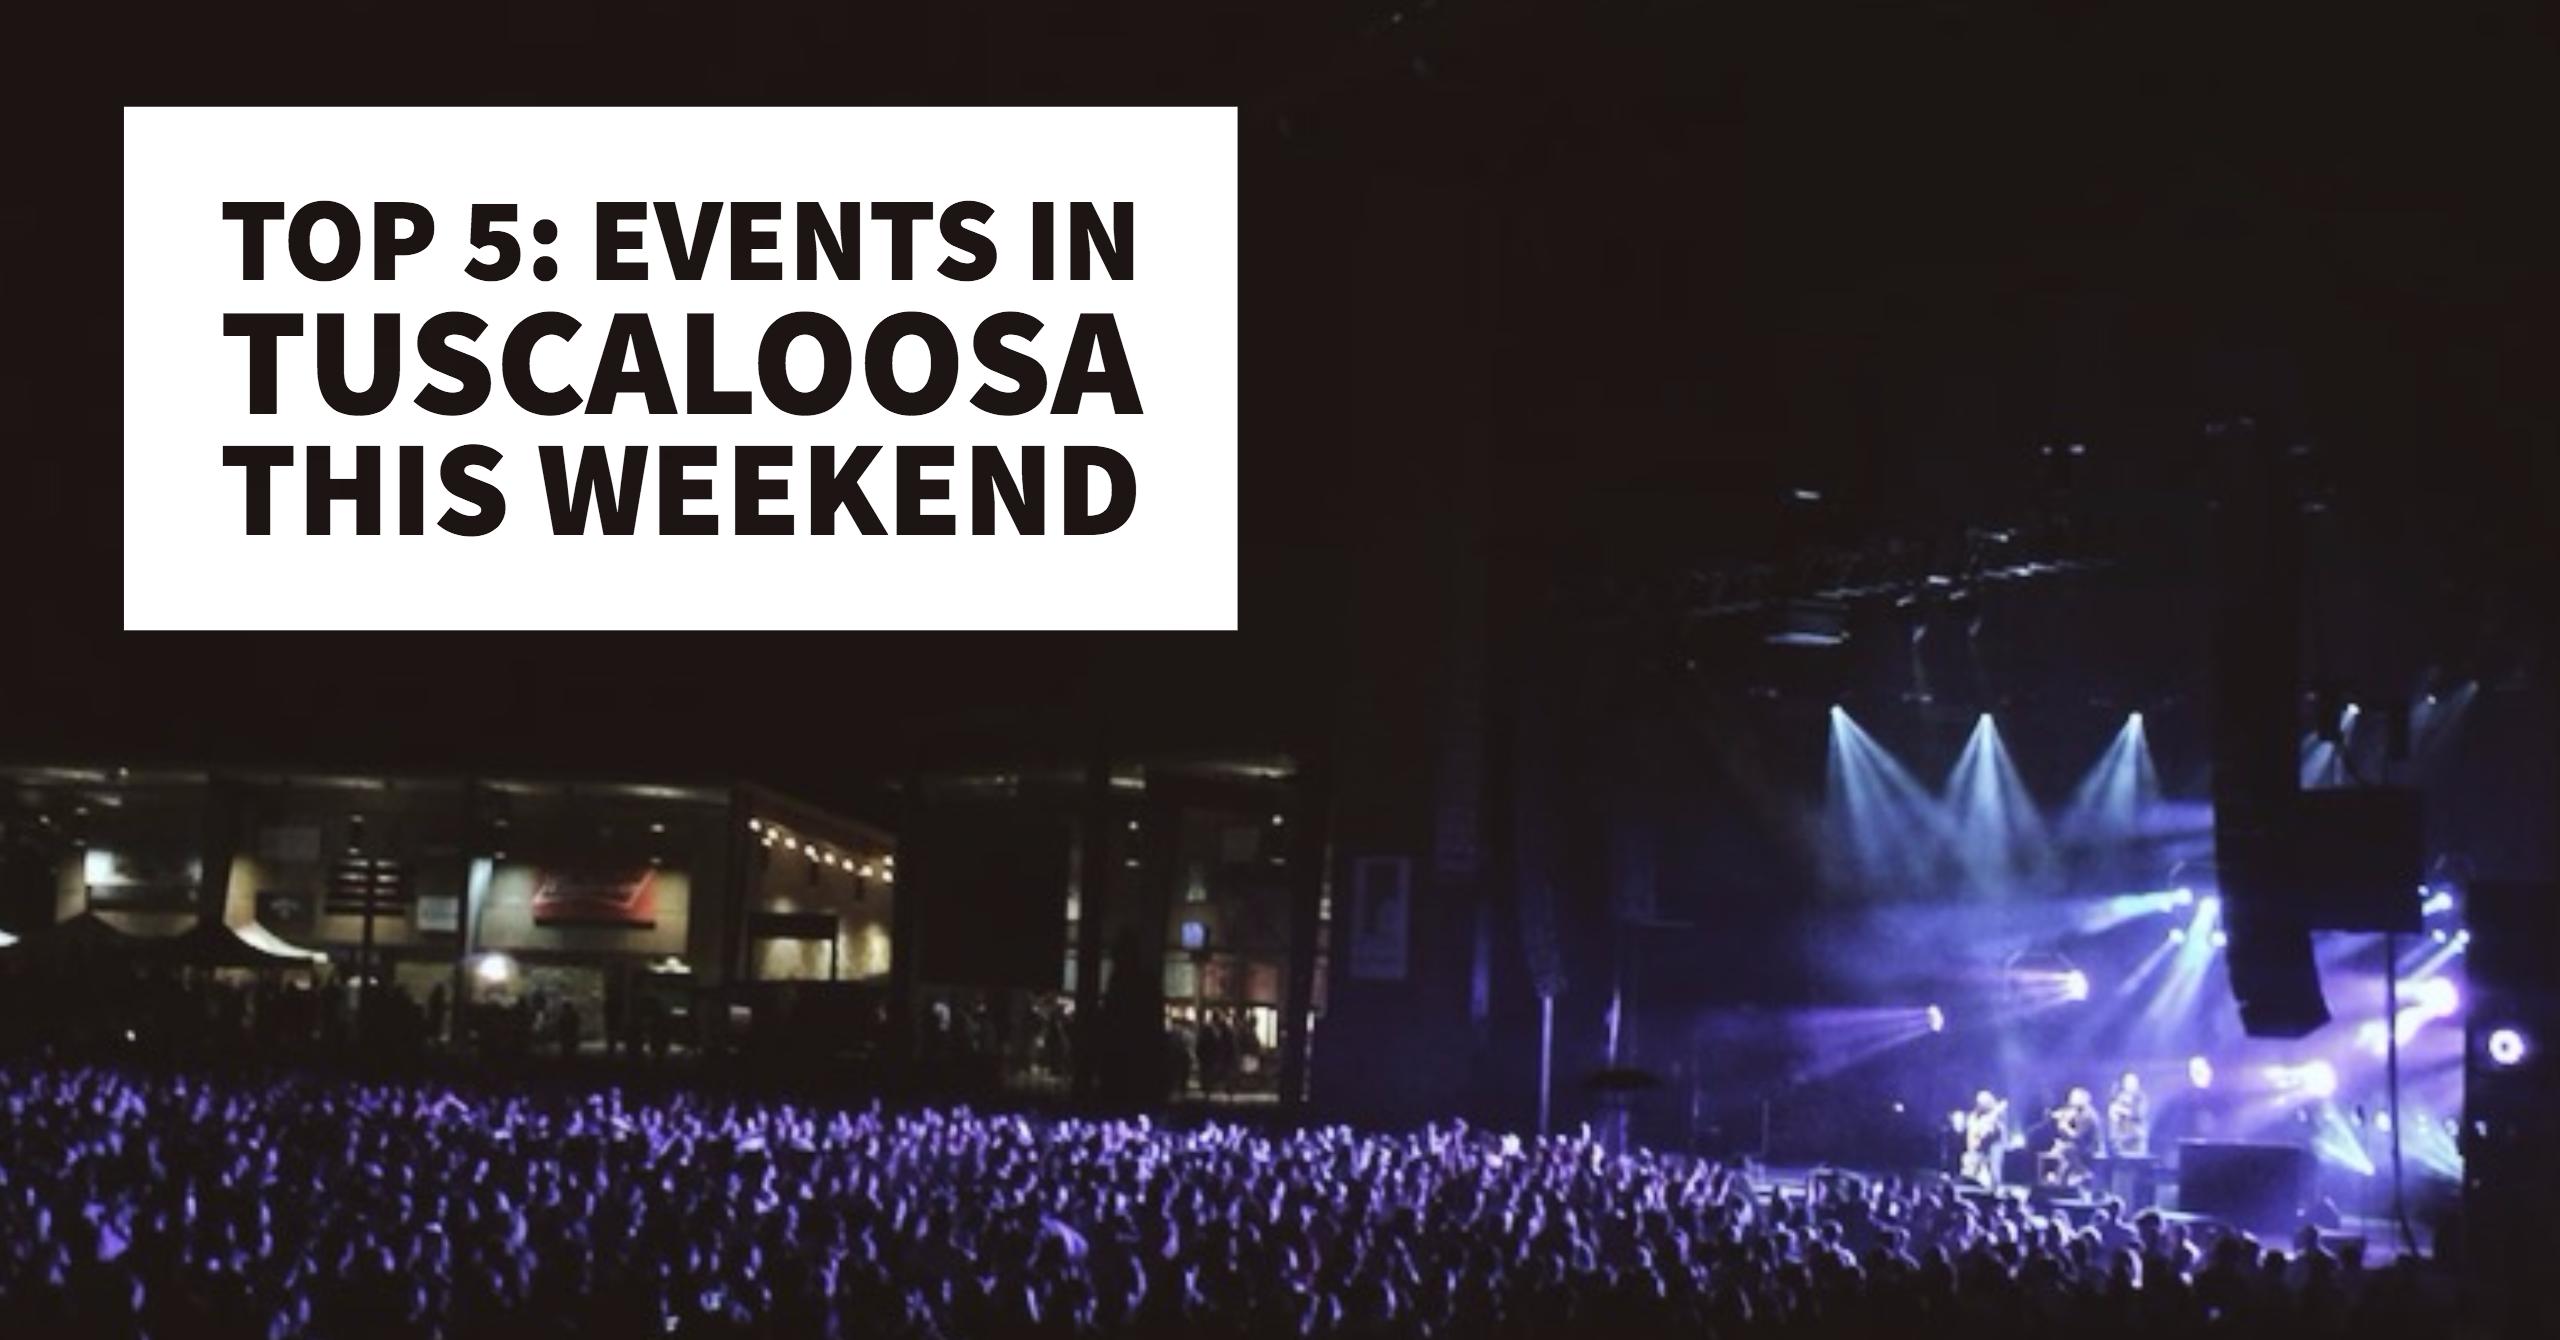 Top 5 Events in Tuscaloosa This Weekend Visit Tuscaloosa